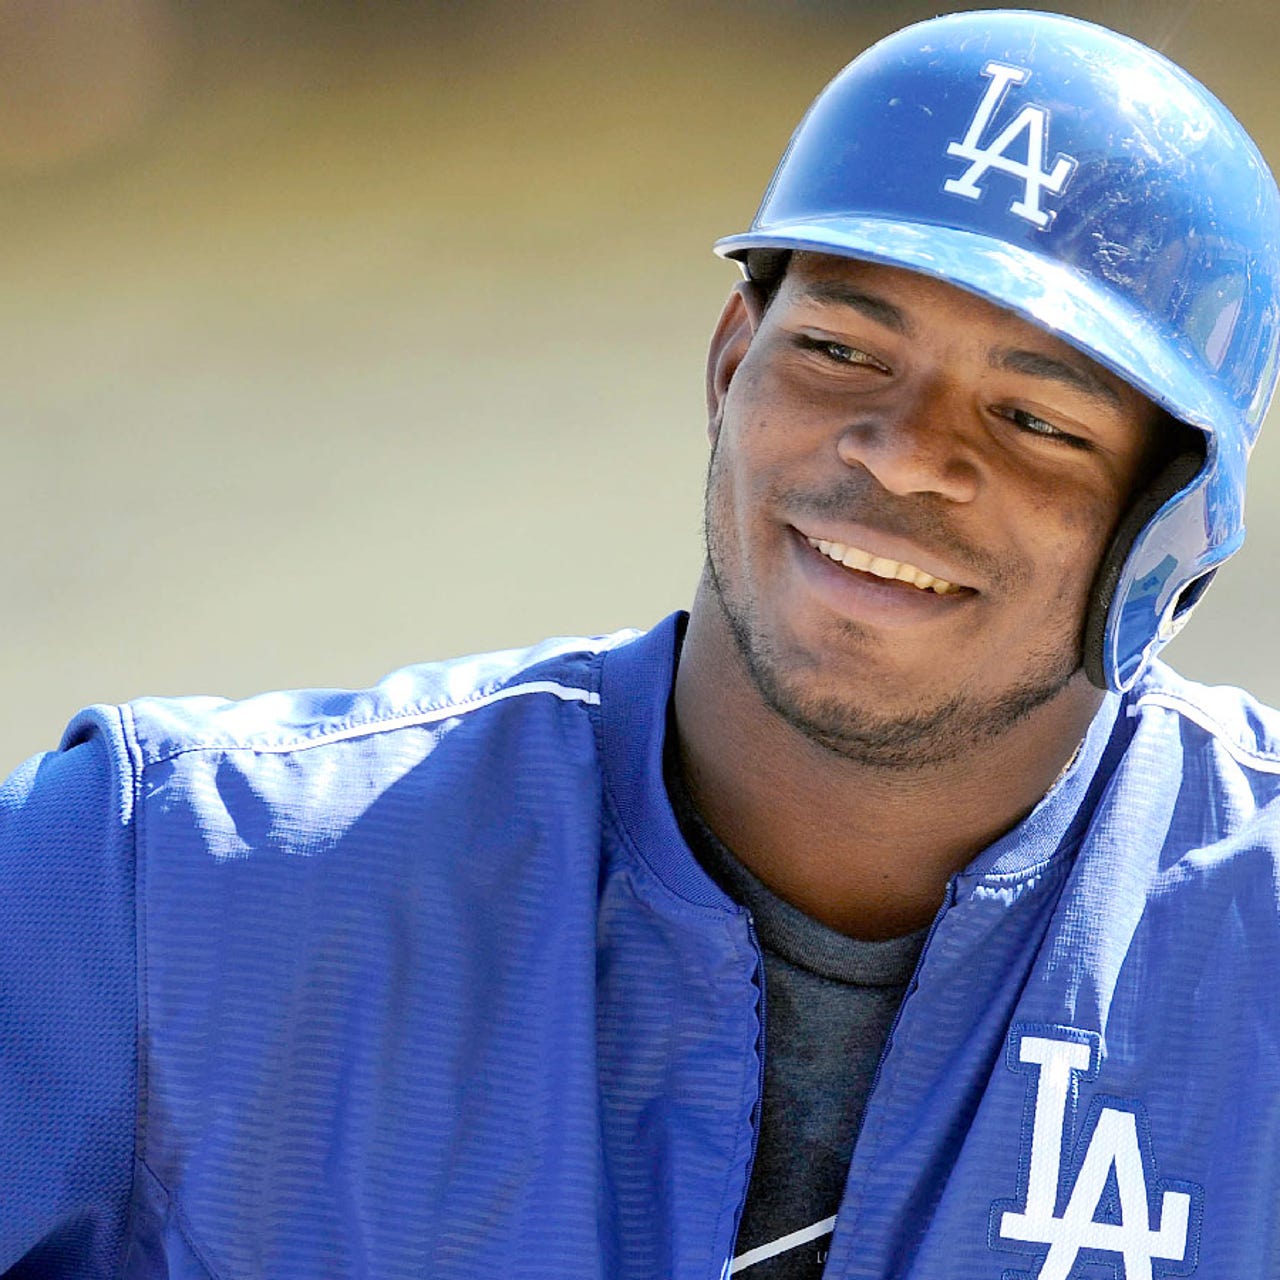 Dodgers' Yasiel Puig flies over Los Angeles in a helicopter